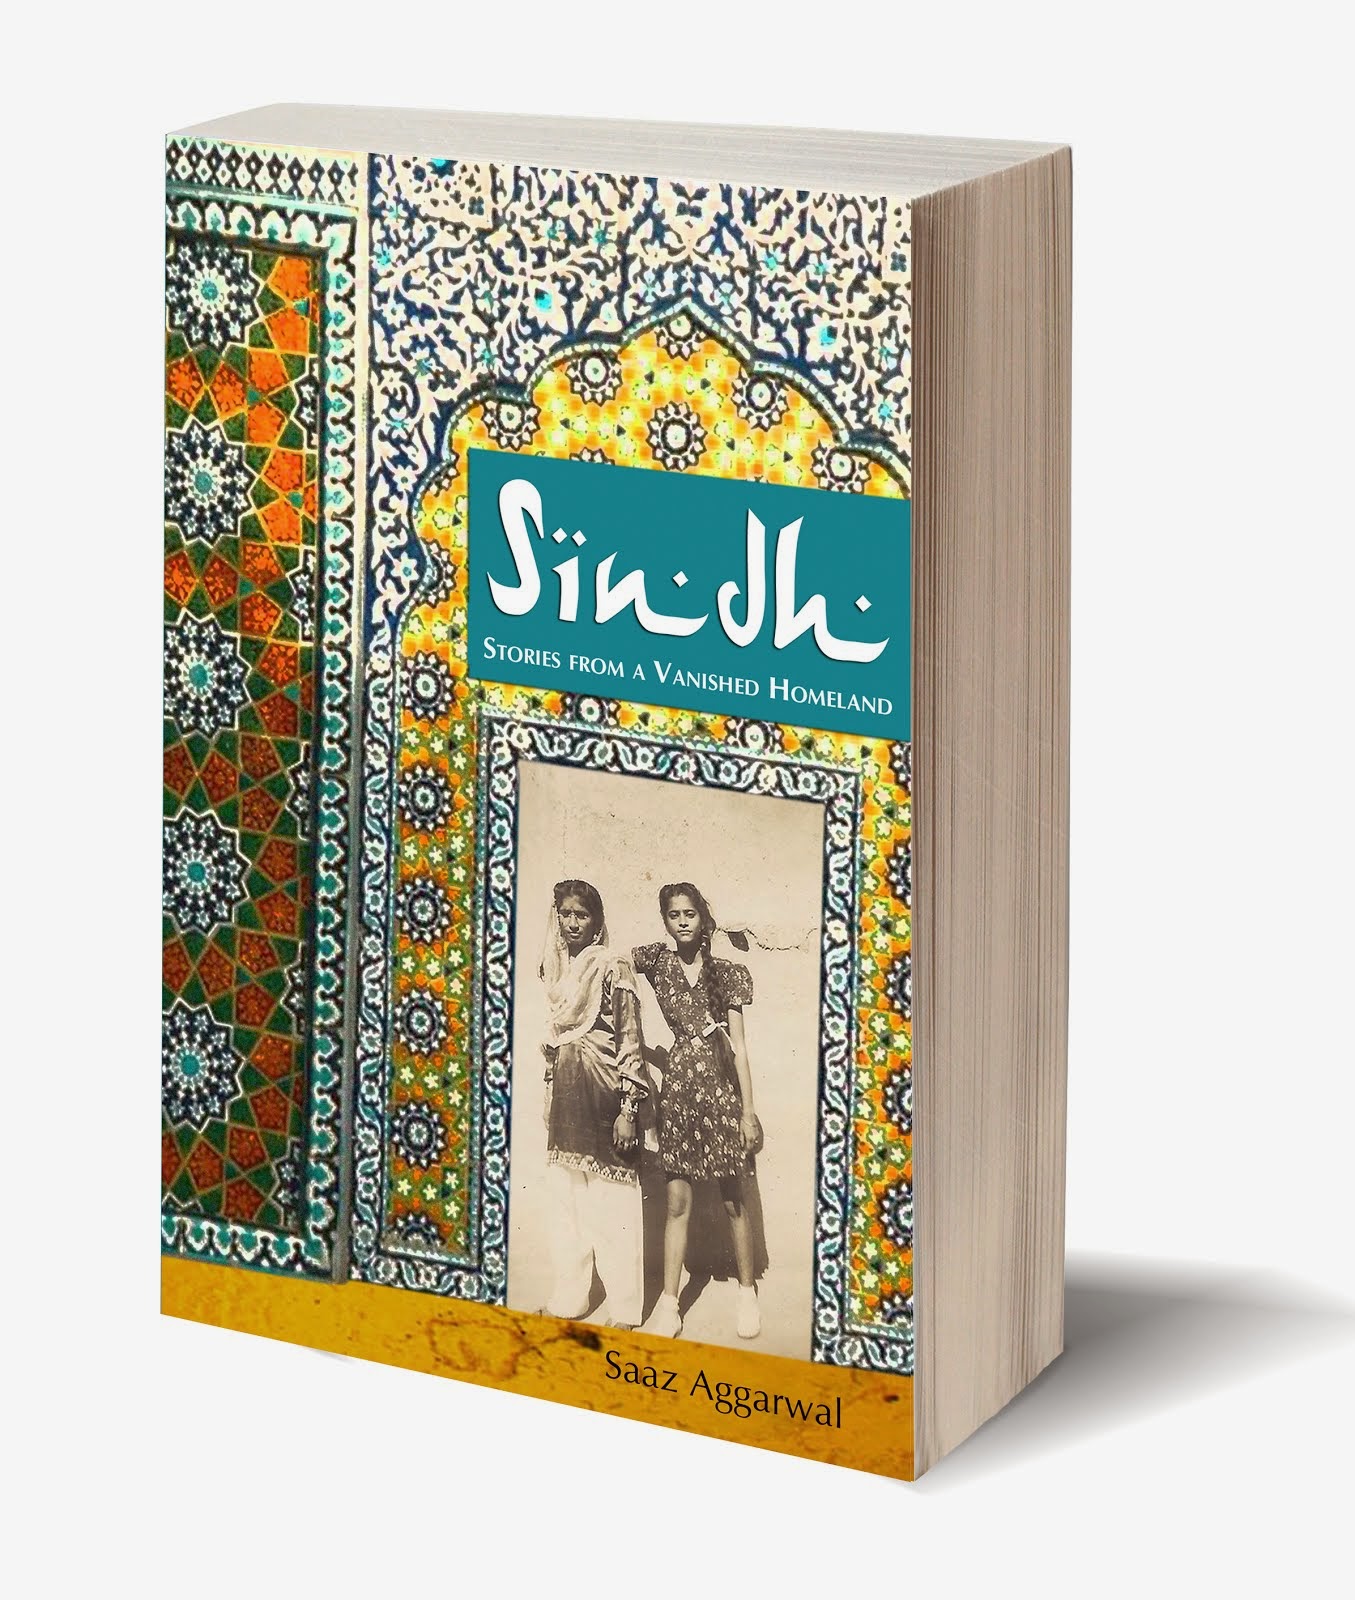 Sindh: Stories from a Vanished Homeland